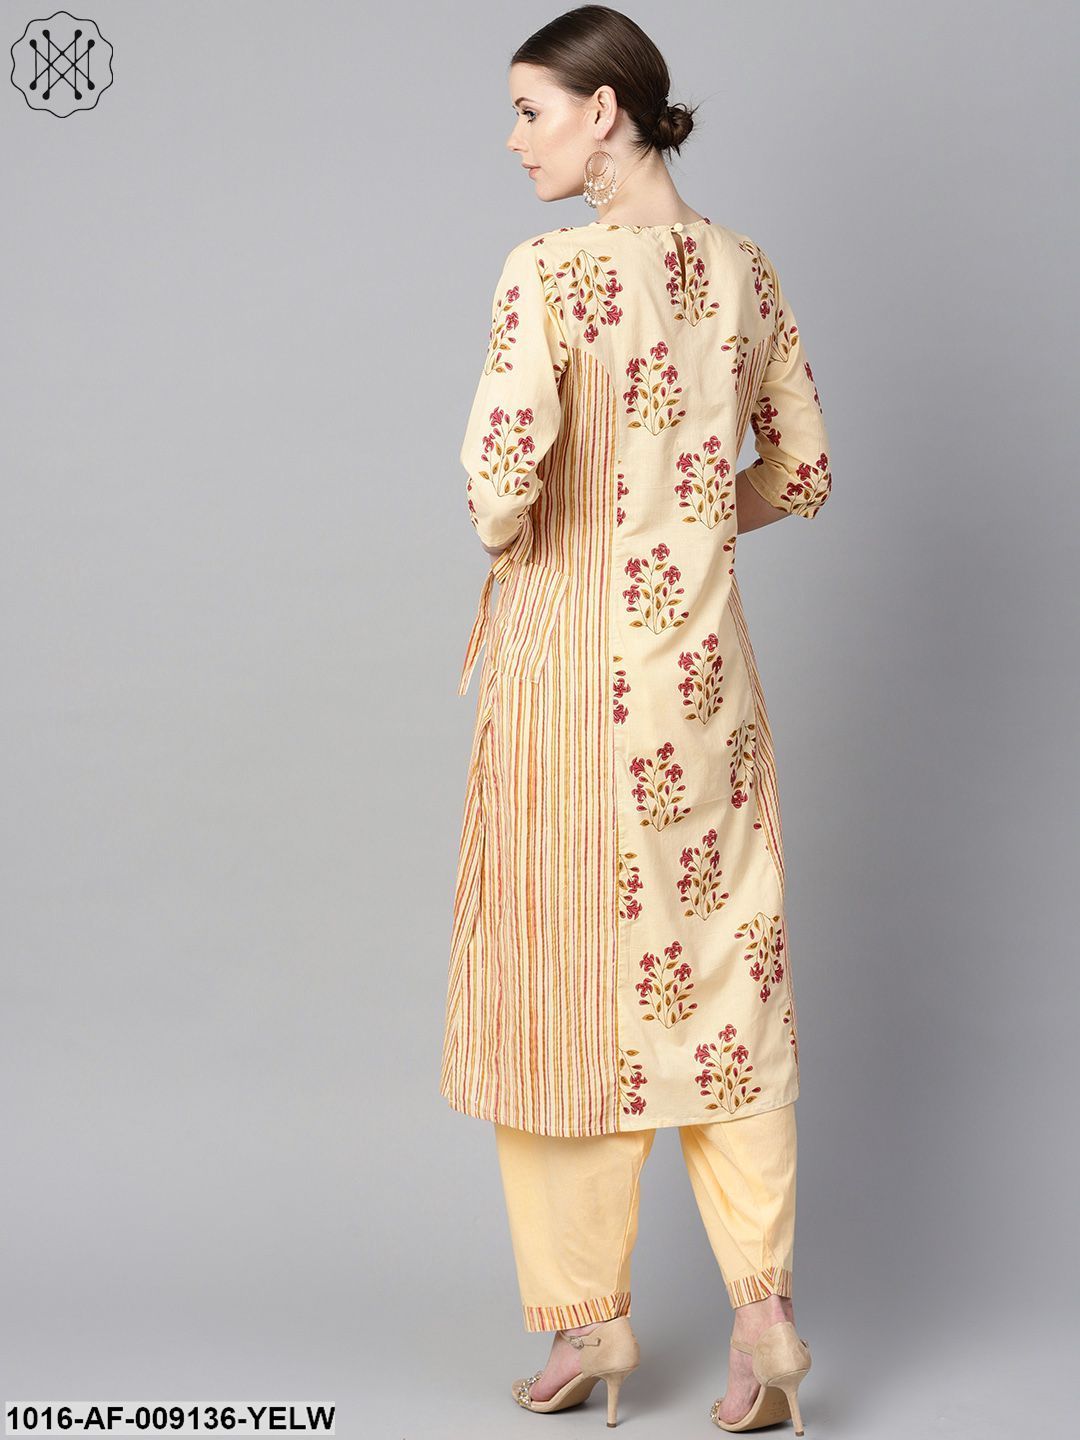 Floral Printed Kurta With Striped Panels With Solid Light Beige Salwar